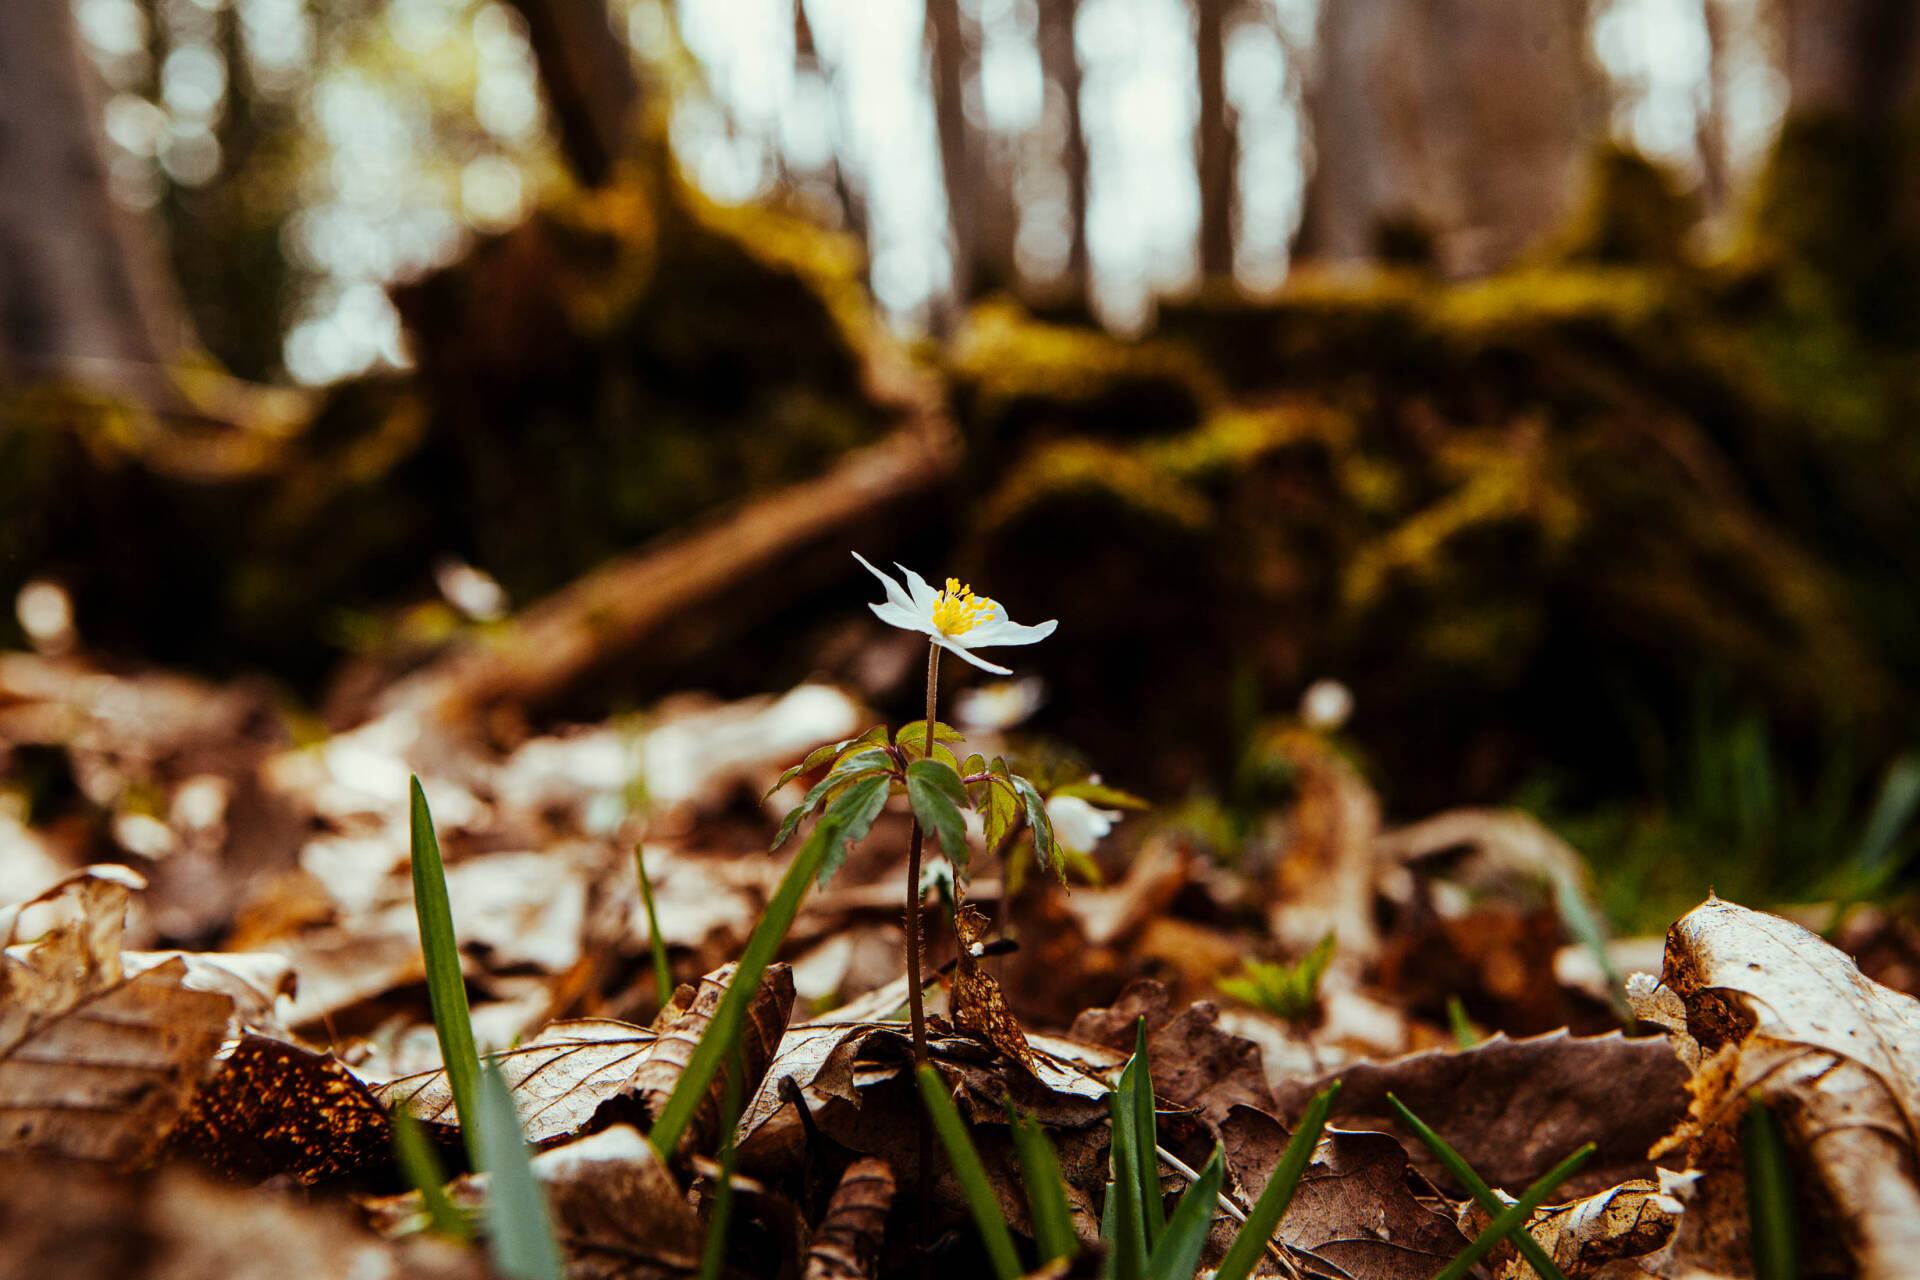 A single flower surrounded by woodland.